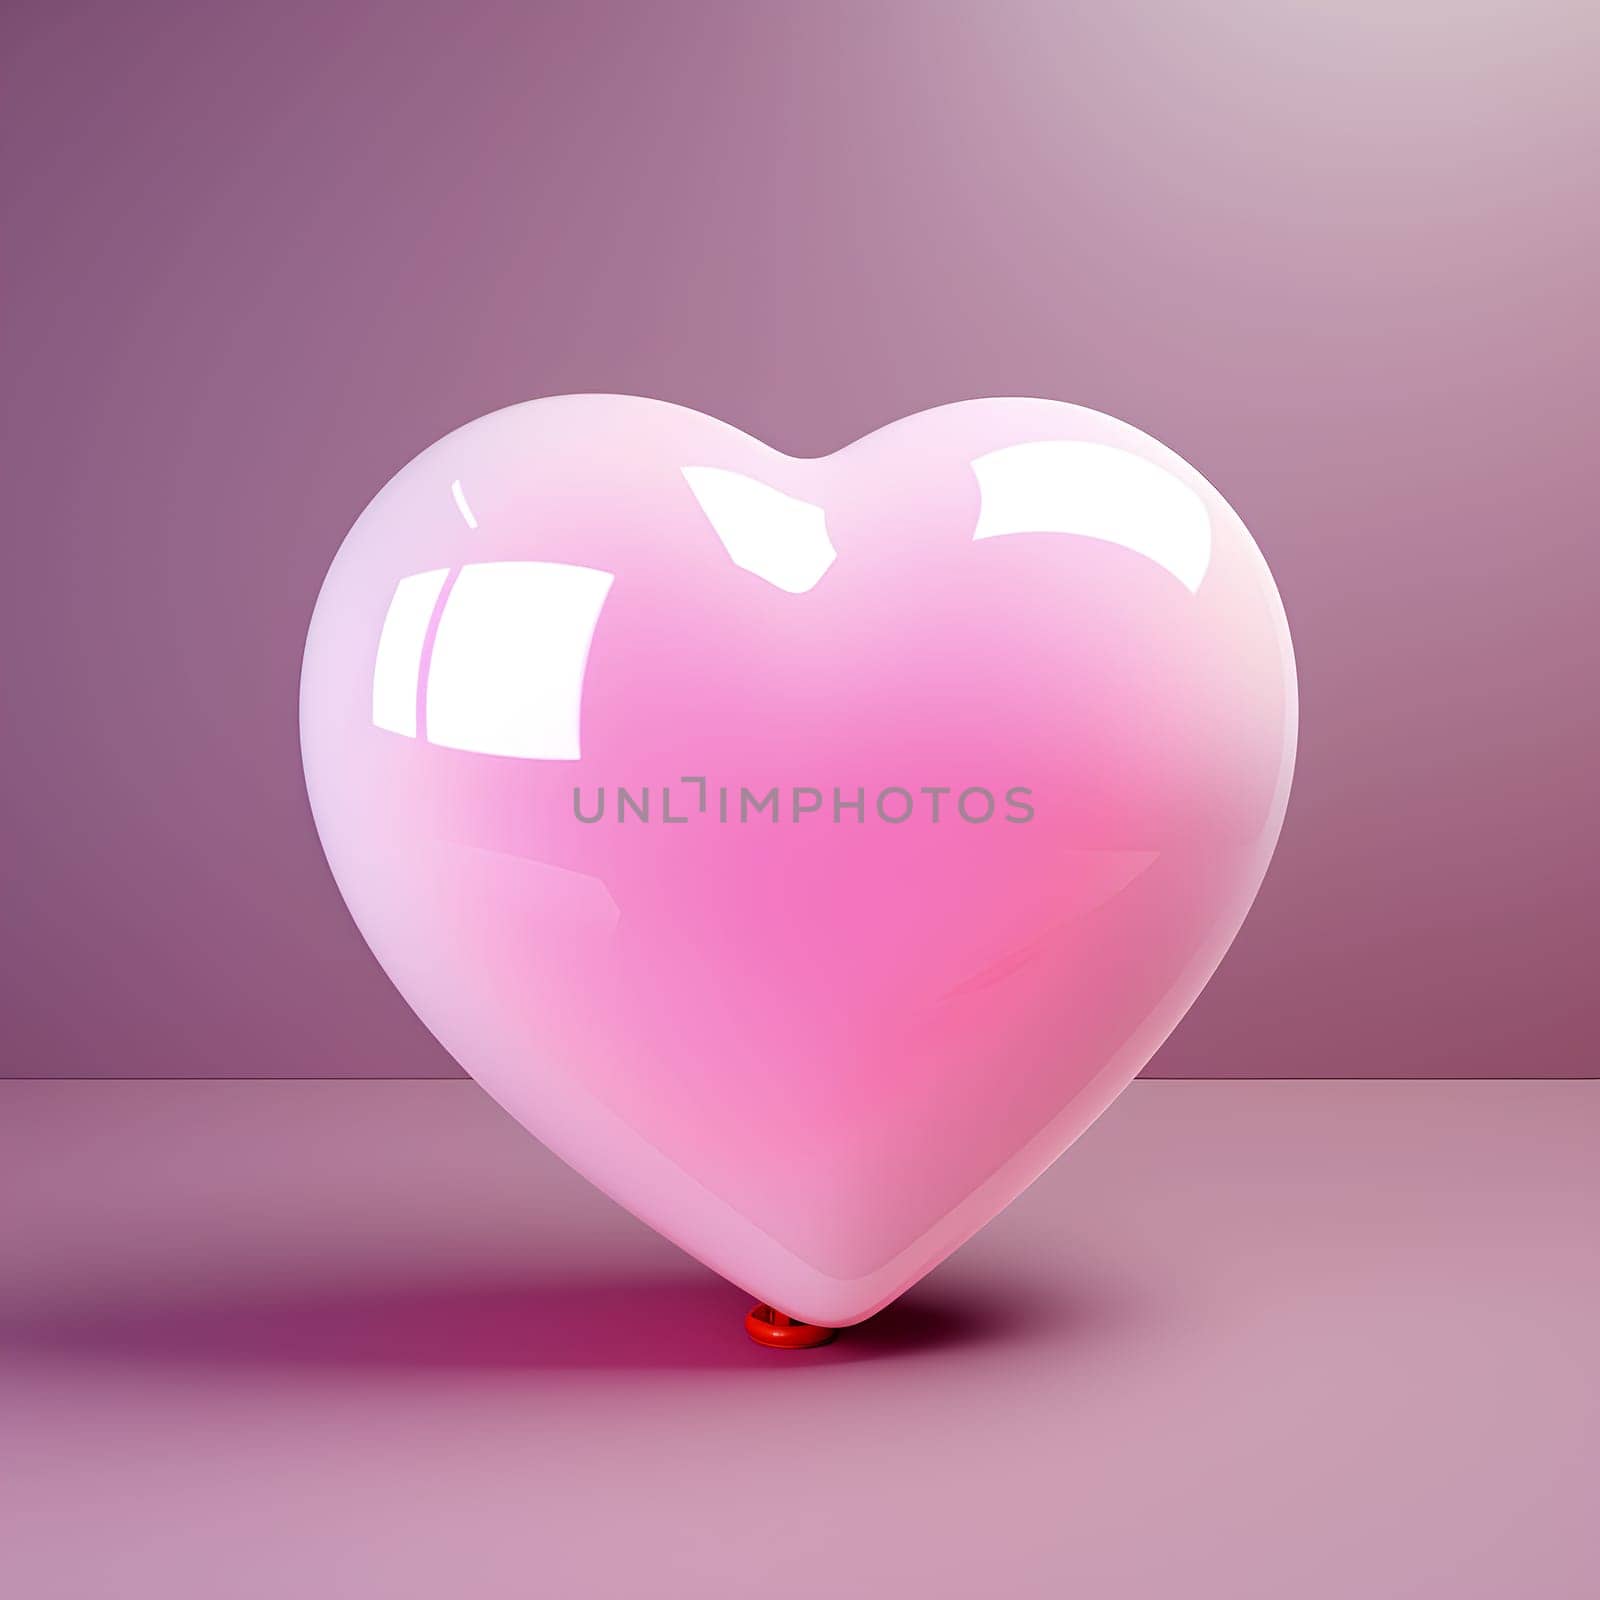 Pink heart sits against a complementary background, symbolizing romance and Love - Valentine's Day or wedding themes by chrisroll